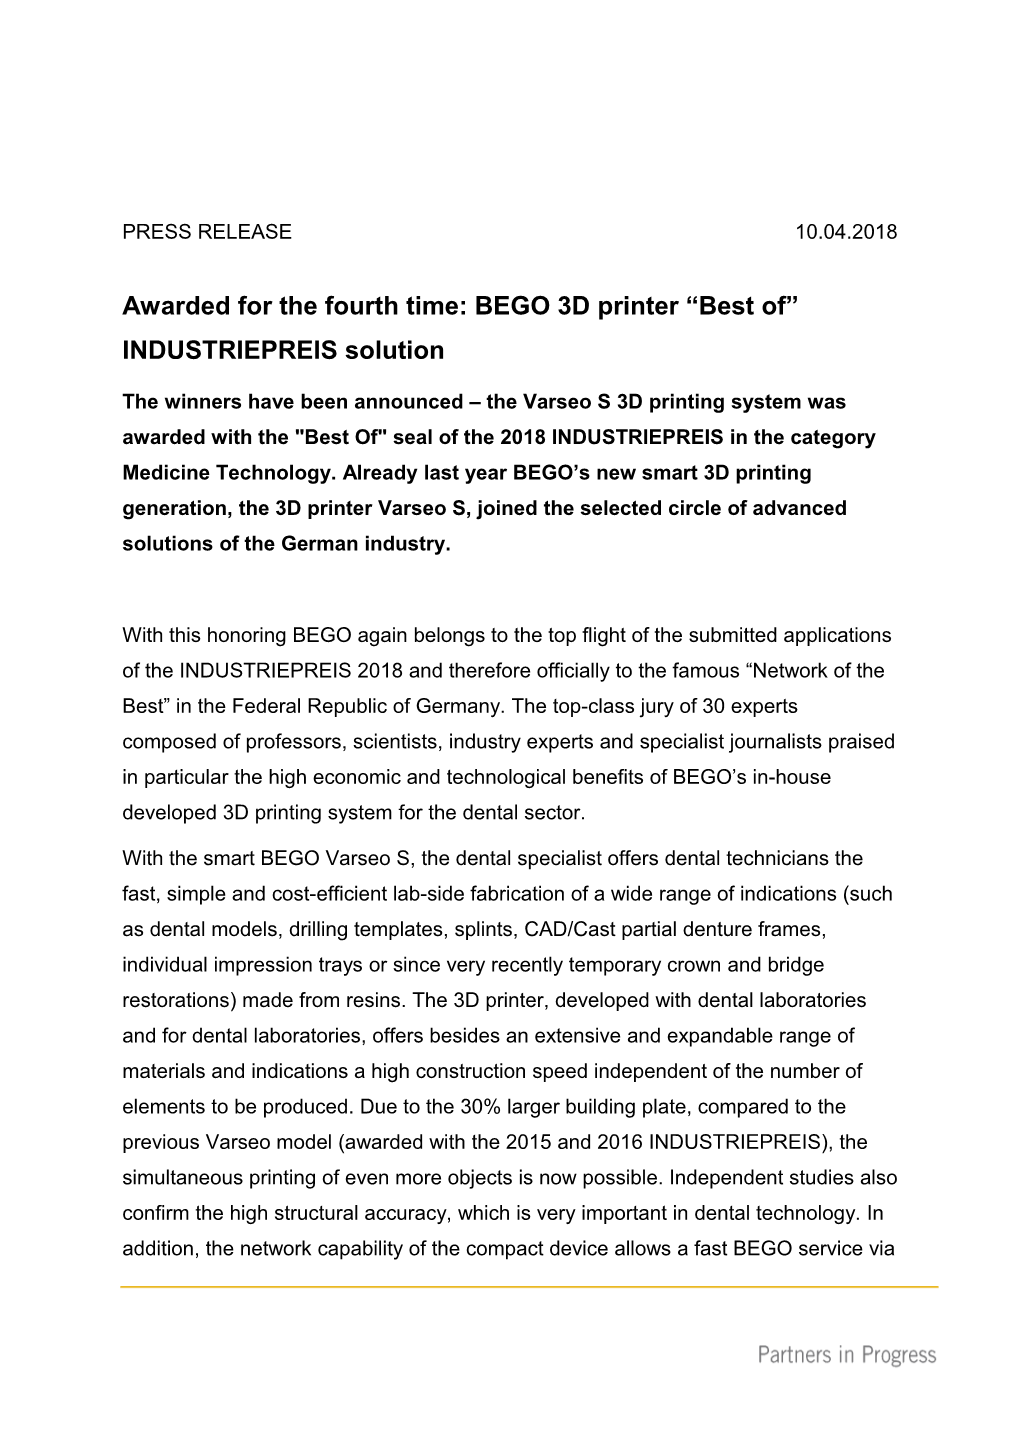 Awarded for the Fourth Time: BEGO 3D Printer Best of INDUSTRIEPREIS Solution